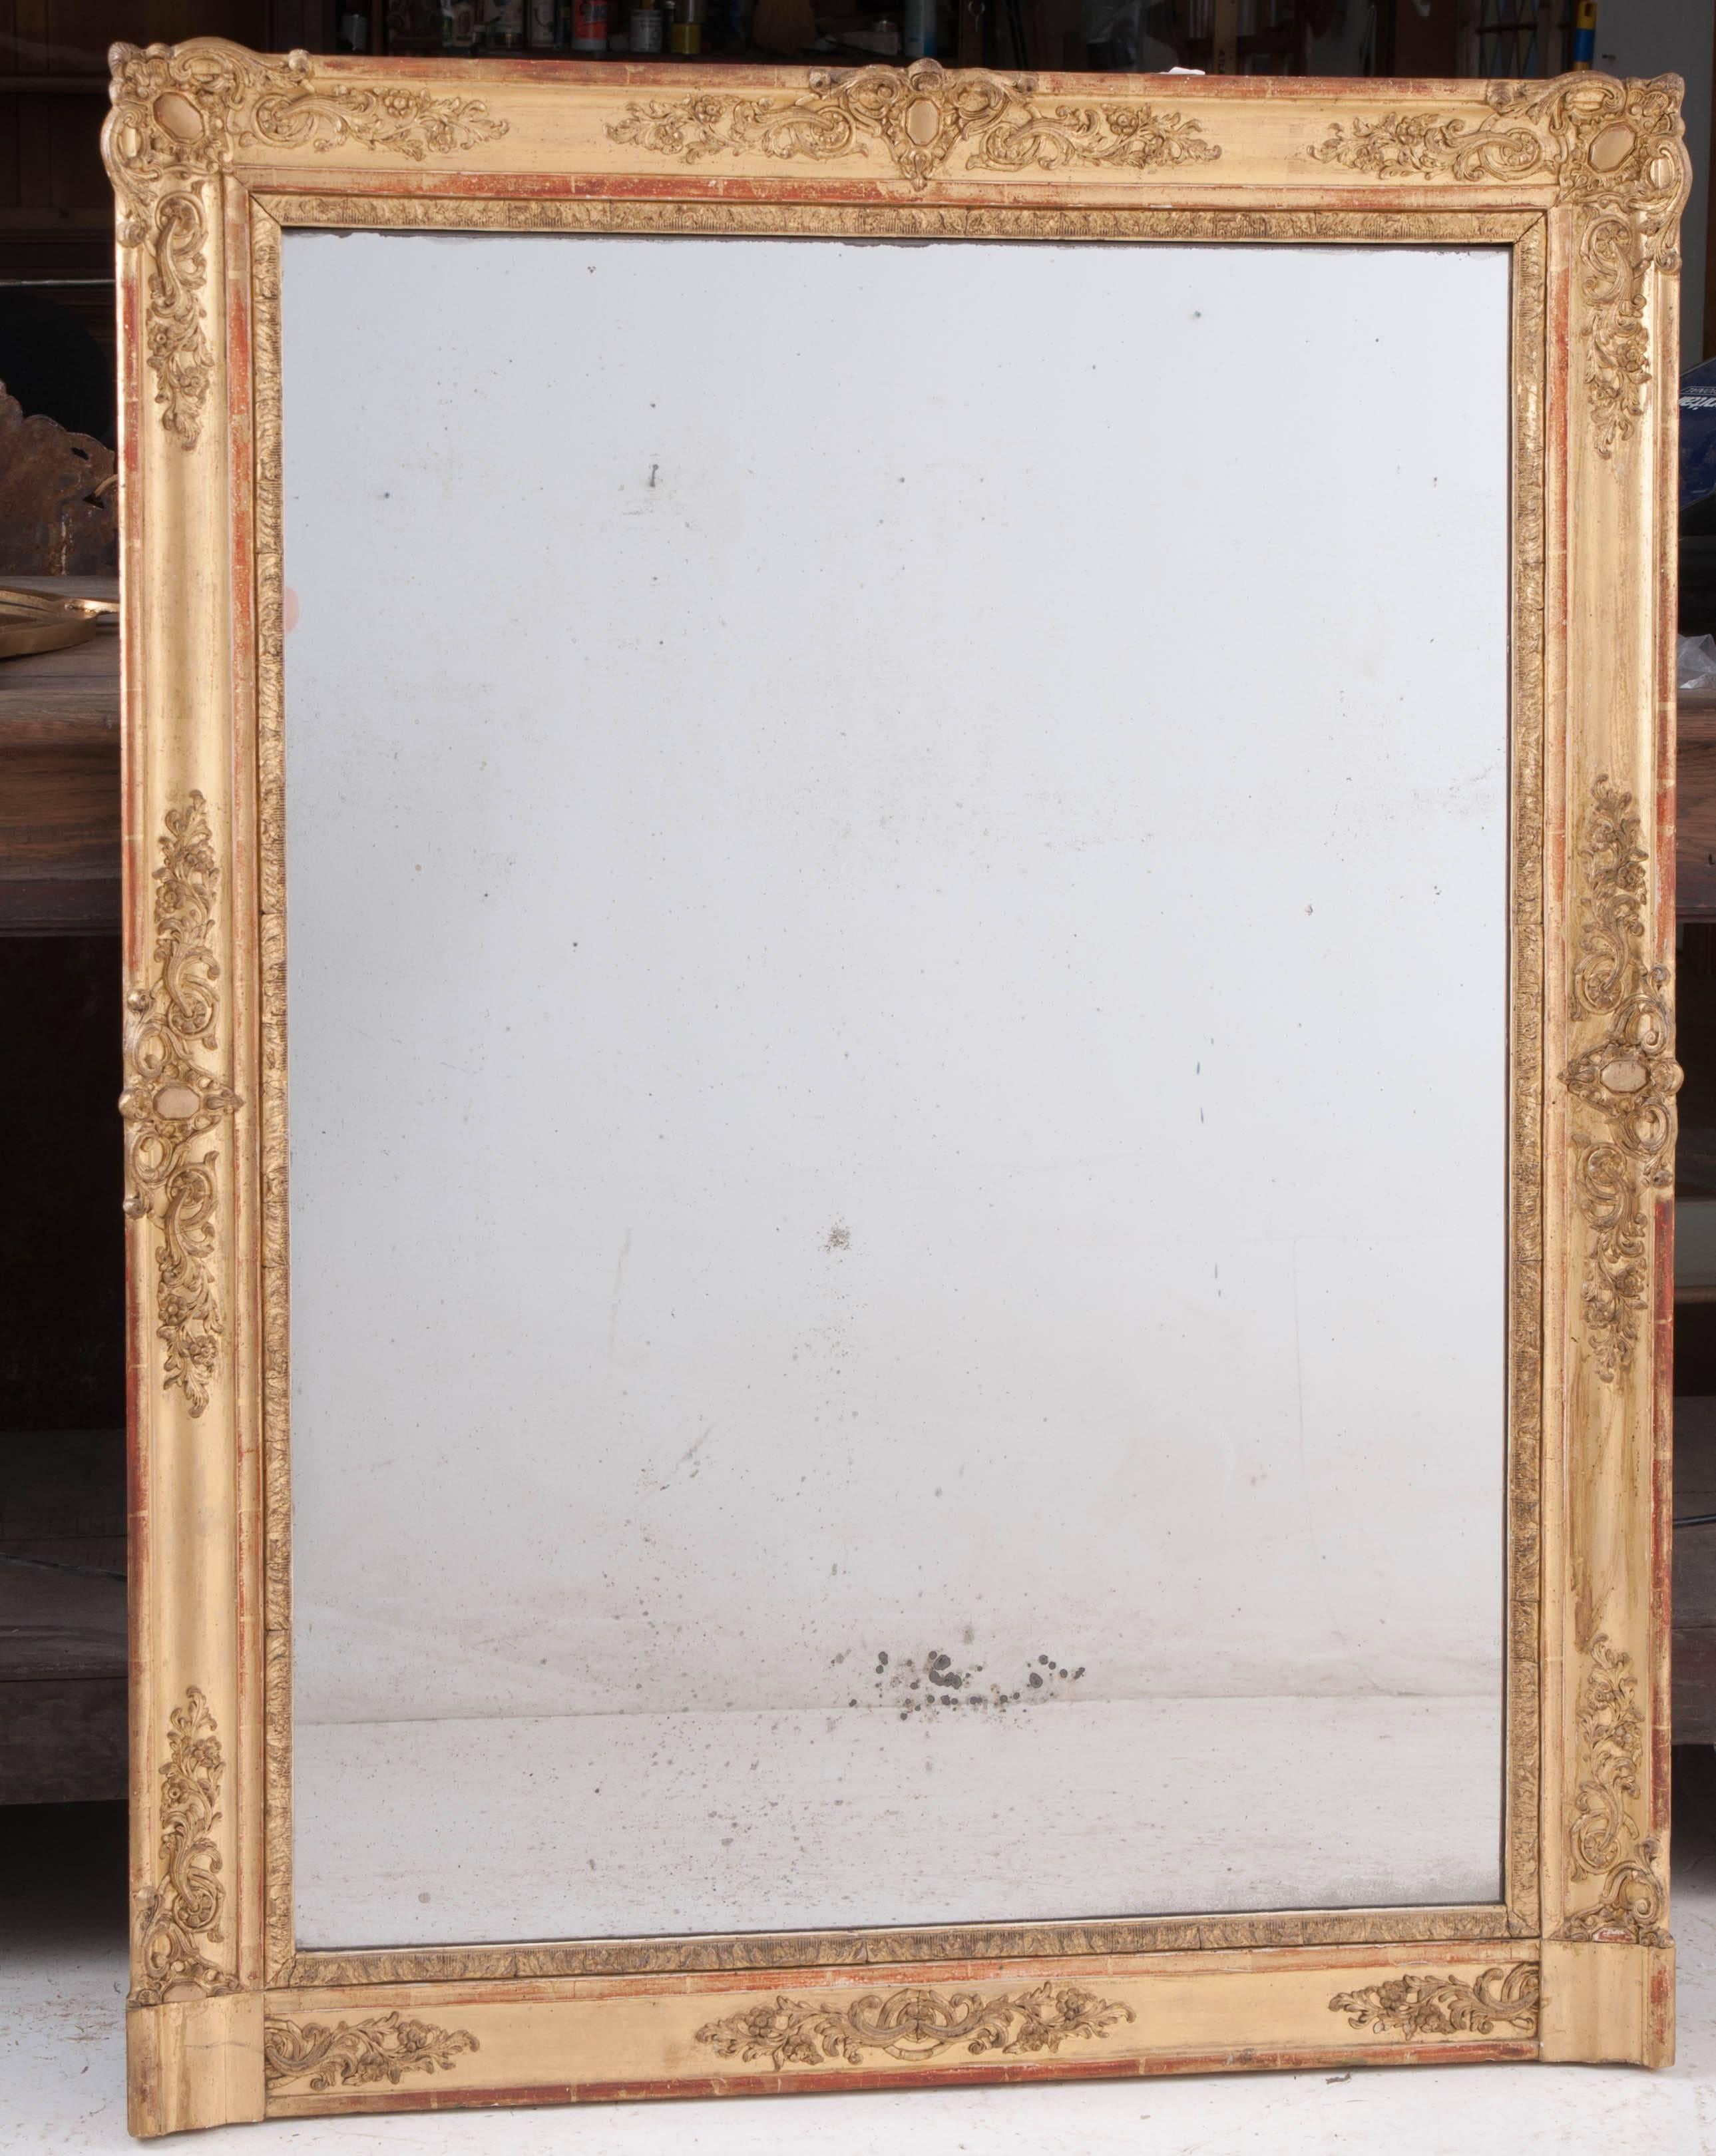 A grand gold gilt mantel mirror from 19th century, France. Decorated with symmetrically placed scrolled embellishments, the frame is ornate, yet restrained. The mirror has its original mercury glass that is wonderfully foxed. The gold gilt frame is